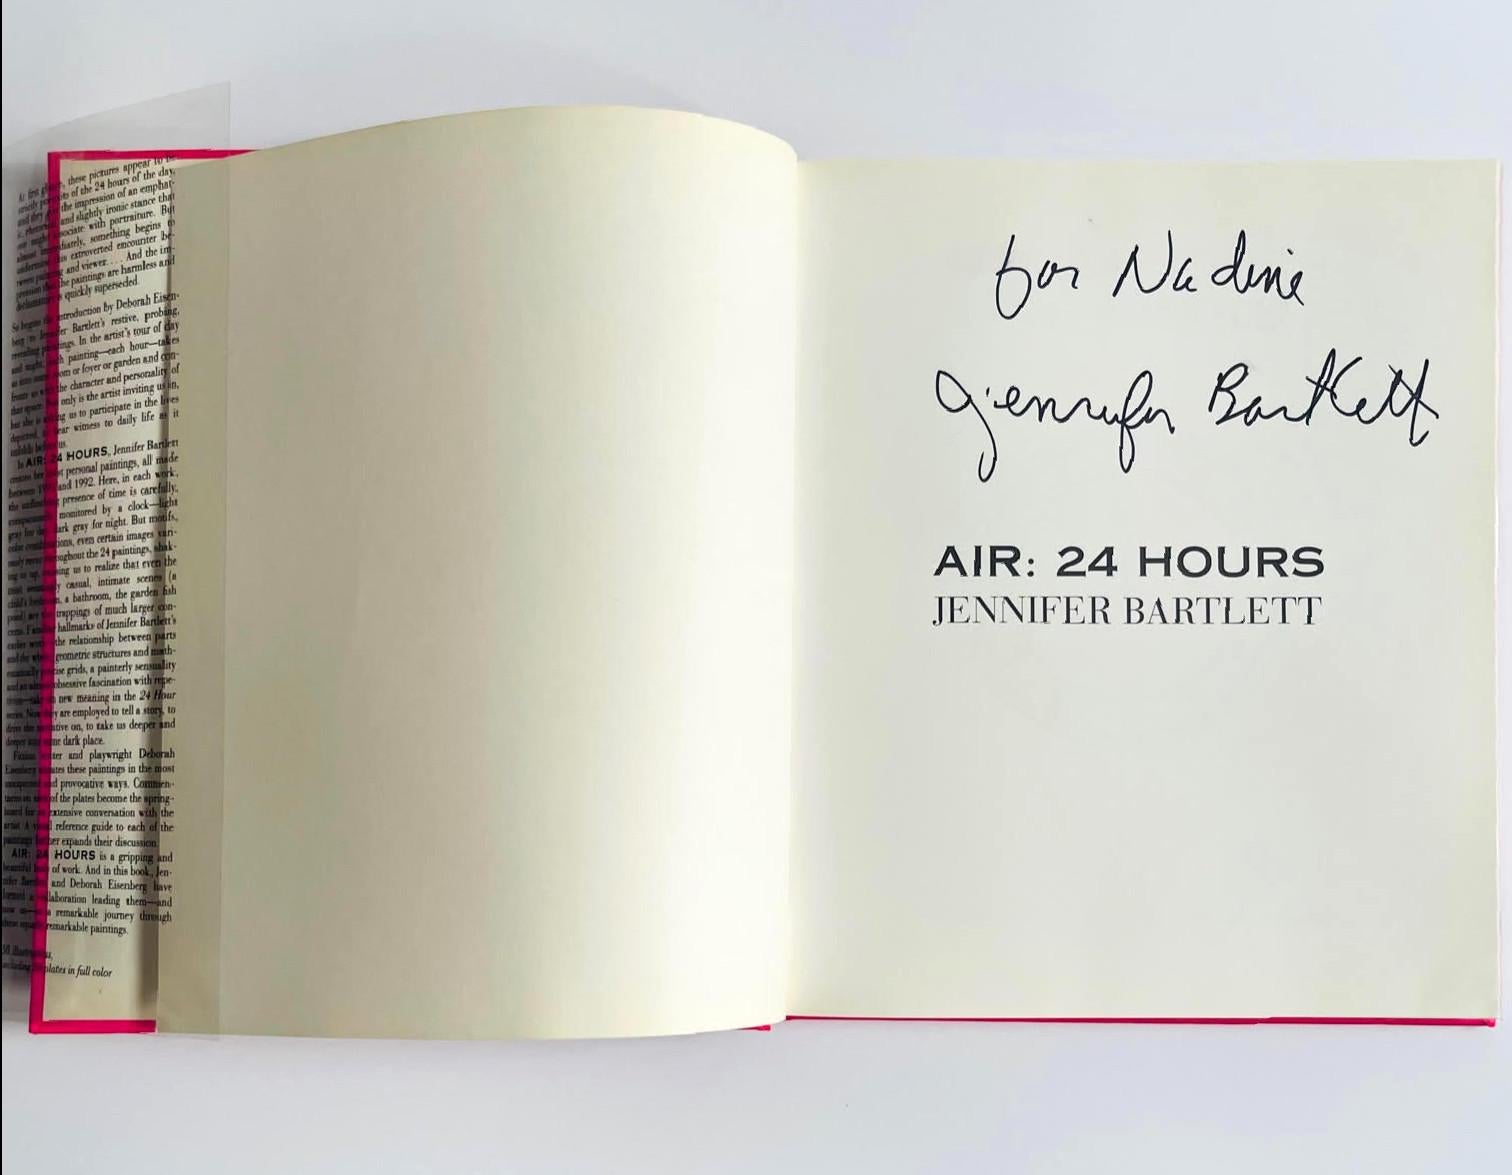 Air: 24 Hours (Hand signed and inscribed hardback monograph) abstract figurative - Print by Jennifer Bartlett